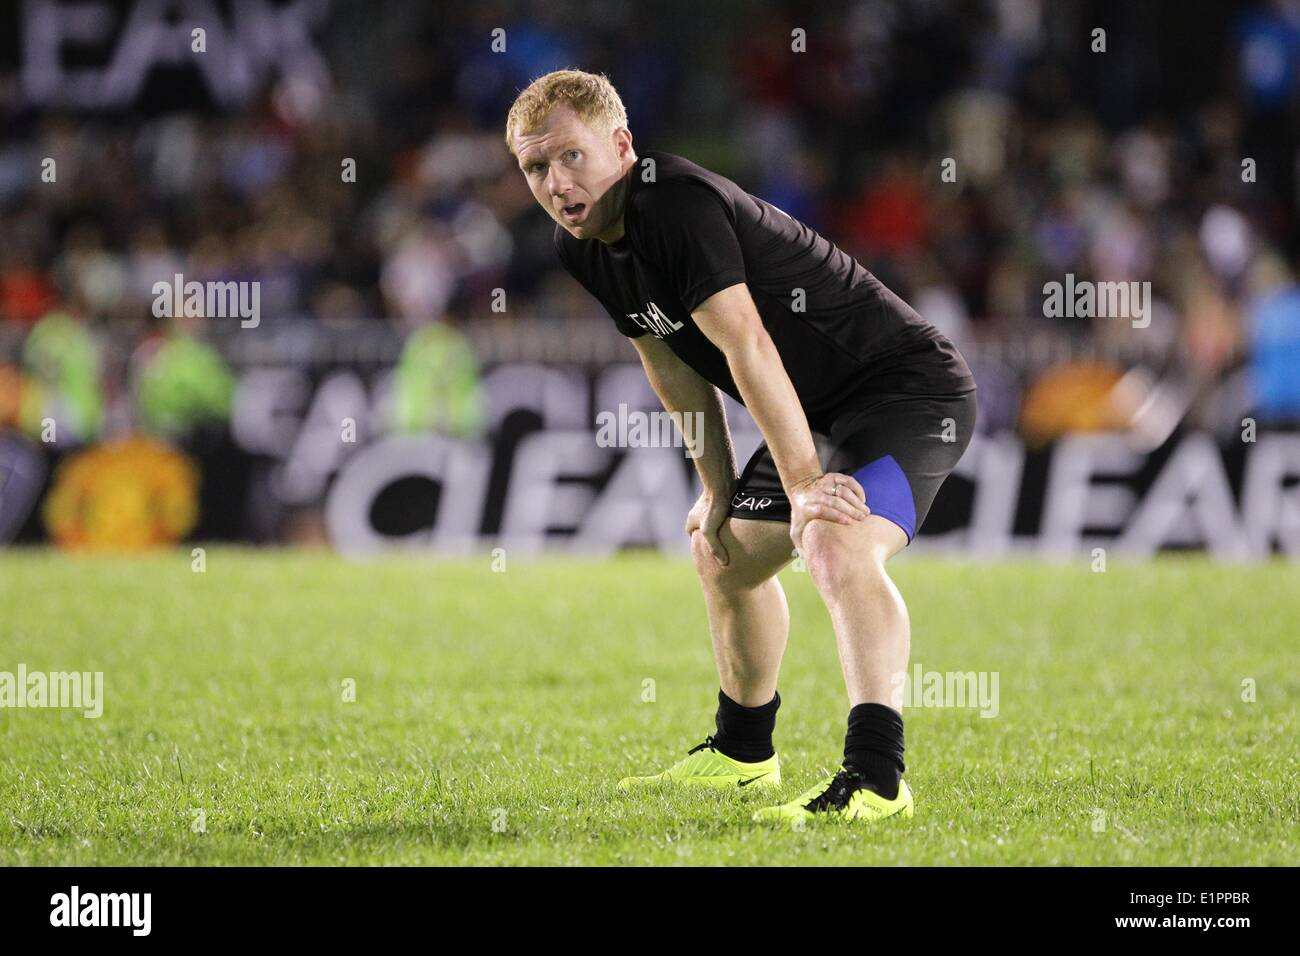 Manila, Philippines. 7th June, 2014. Makati, Philippines - Former Manchester United player Paul Scholes warms up before an exhibition game against local amatuer and professional players in Makati, east of Manila on June 7, 2014. © Mark Cristino/NurPhoto/ZUMAPRESS.com/Alamy Live News Stock Photo